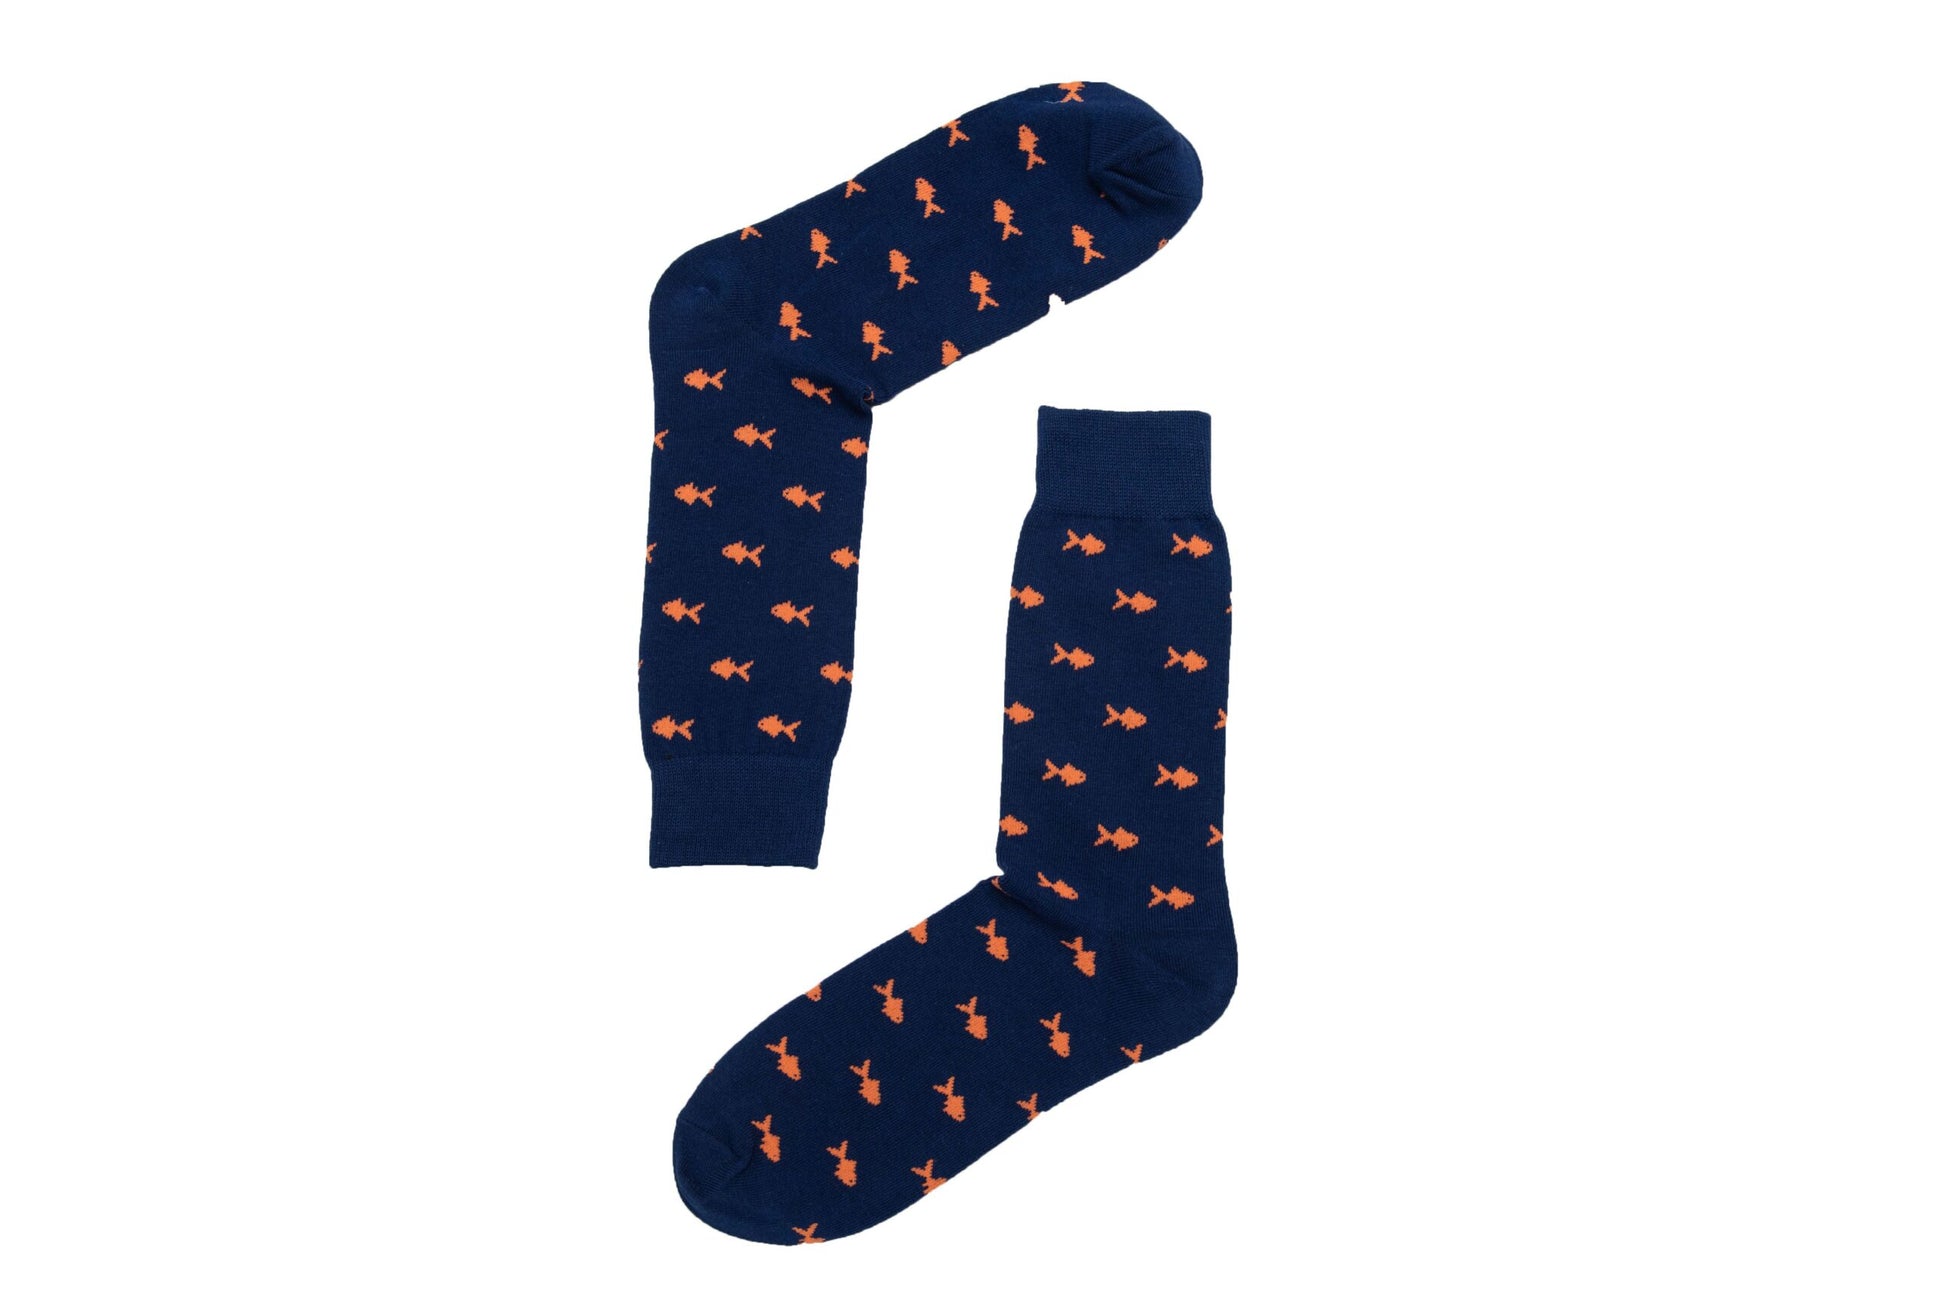 A pair of Gold Fish Socks with orange fish pattern.